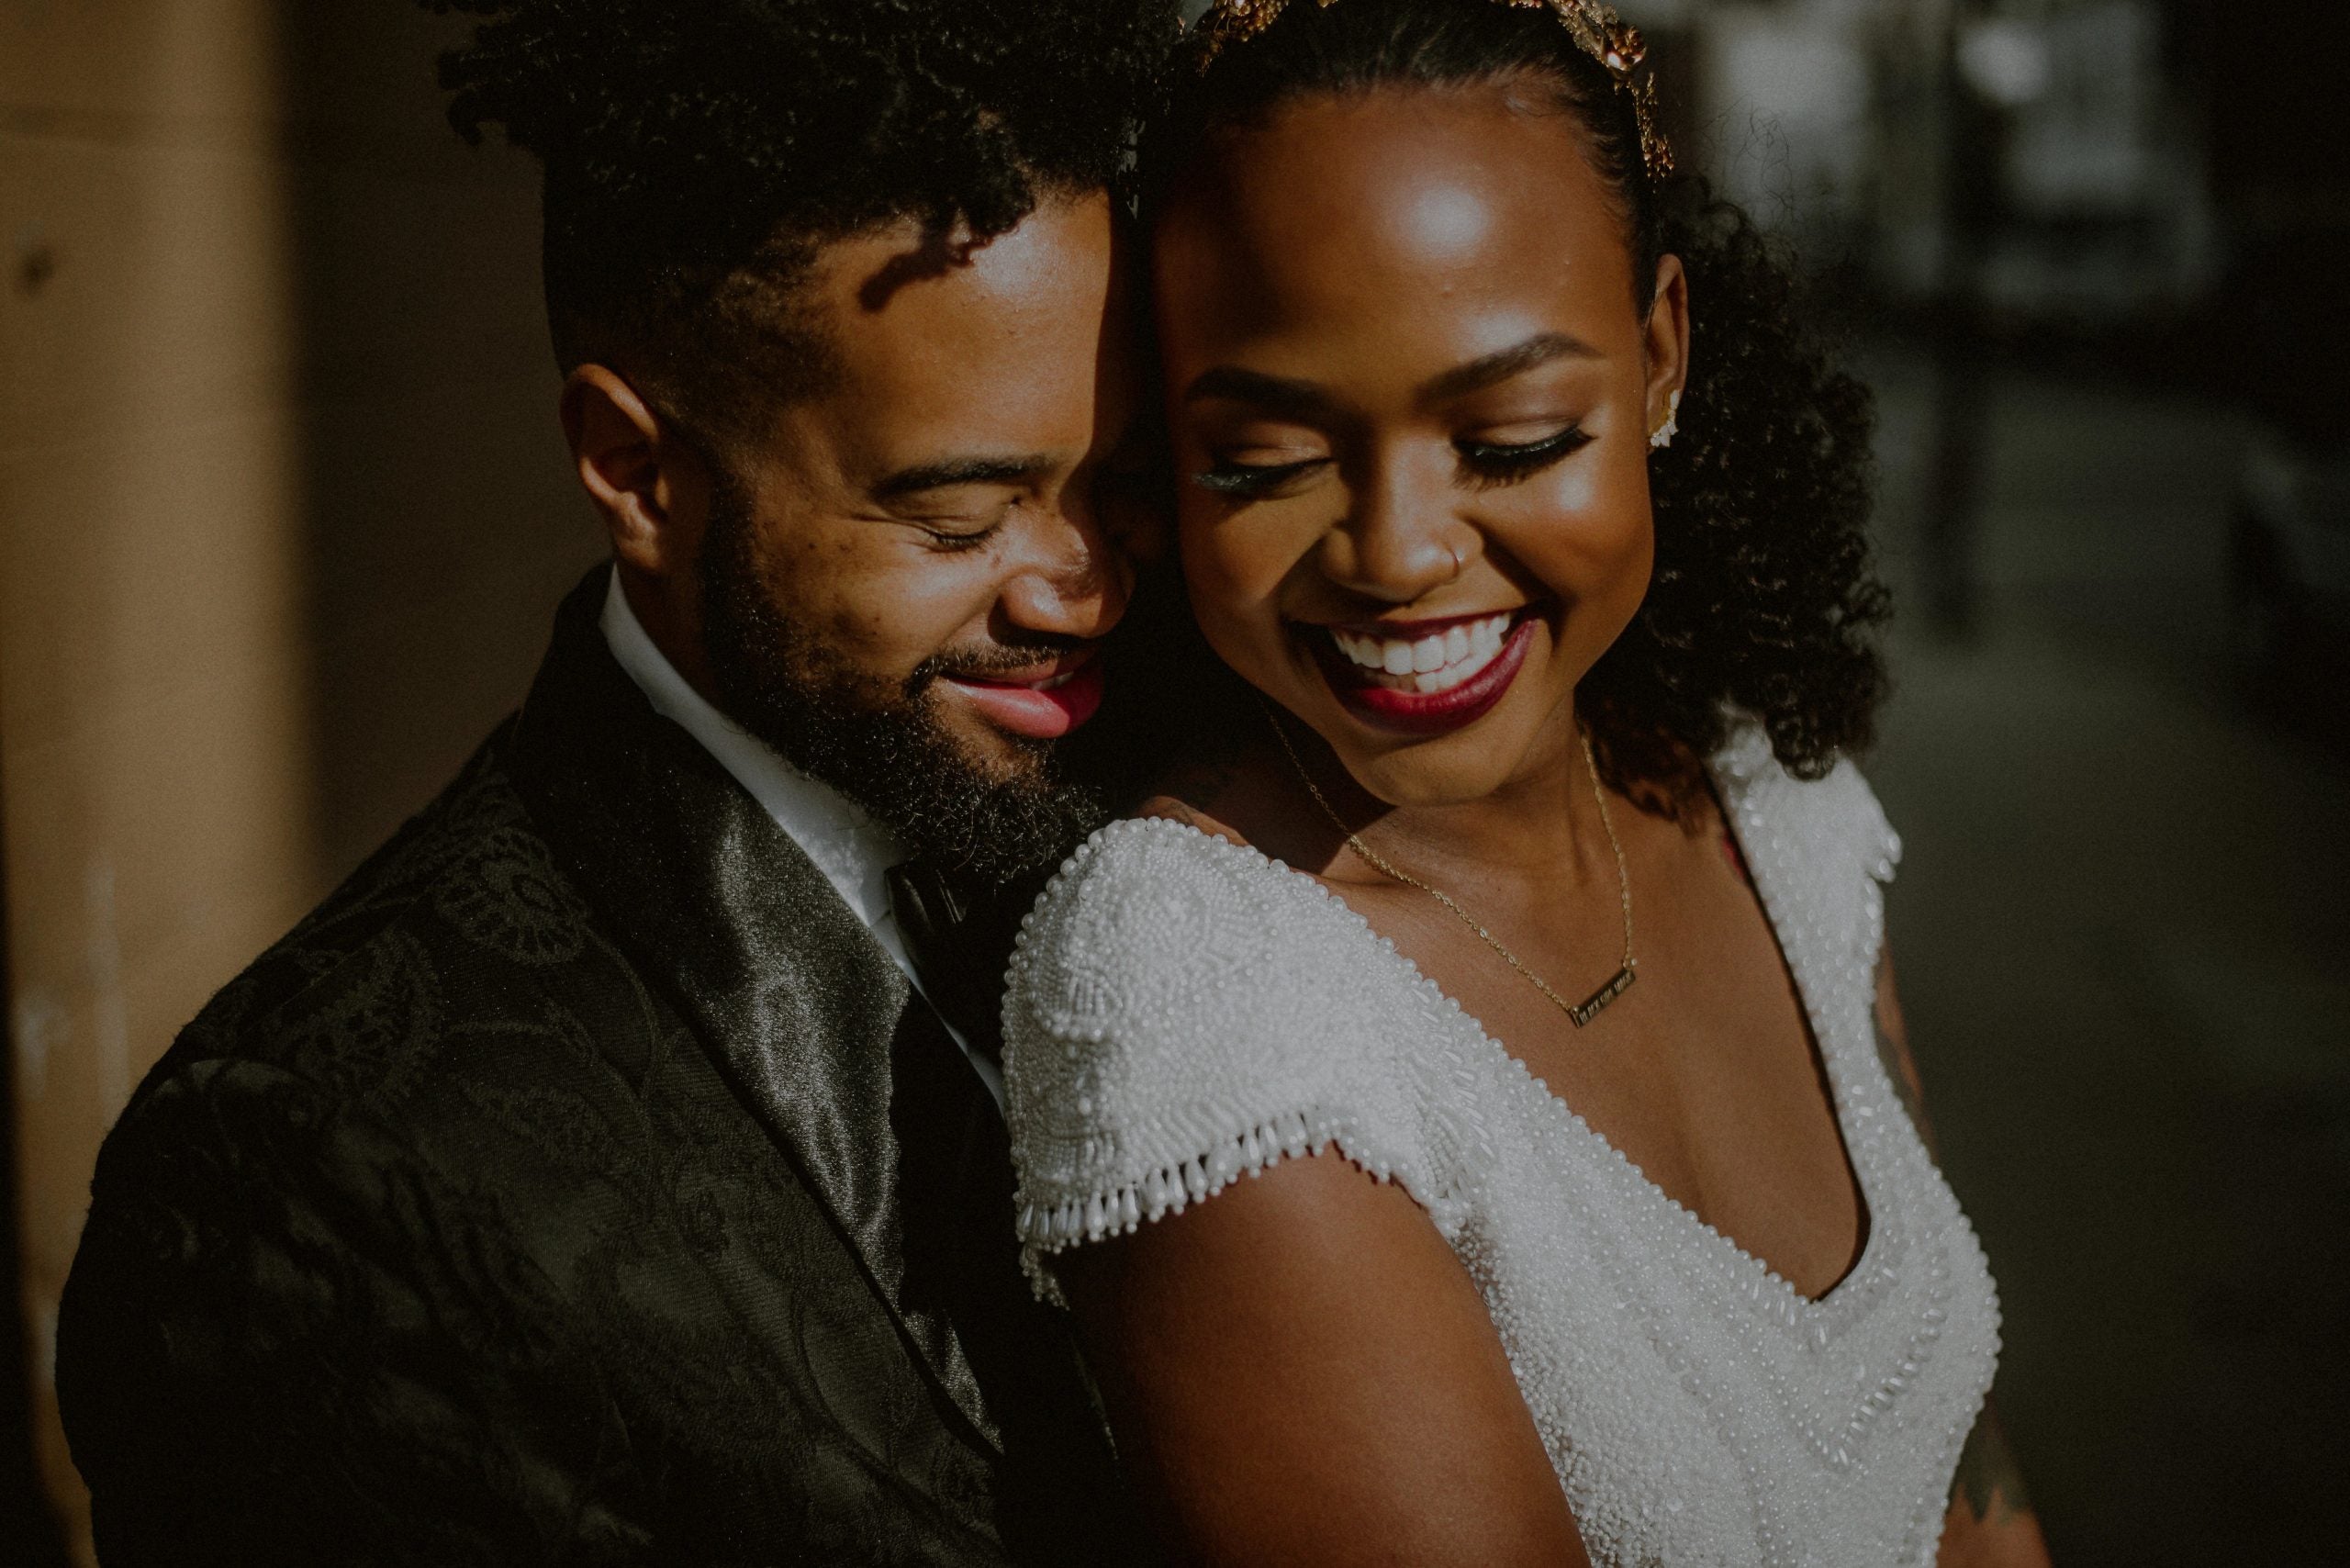 Love In A Hopeful Place: These Couples Show The Power Of Black Love